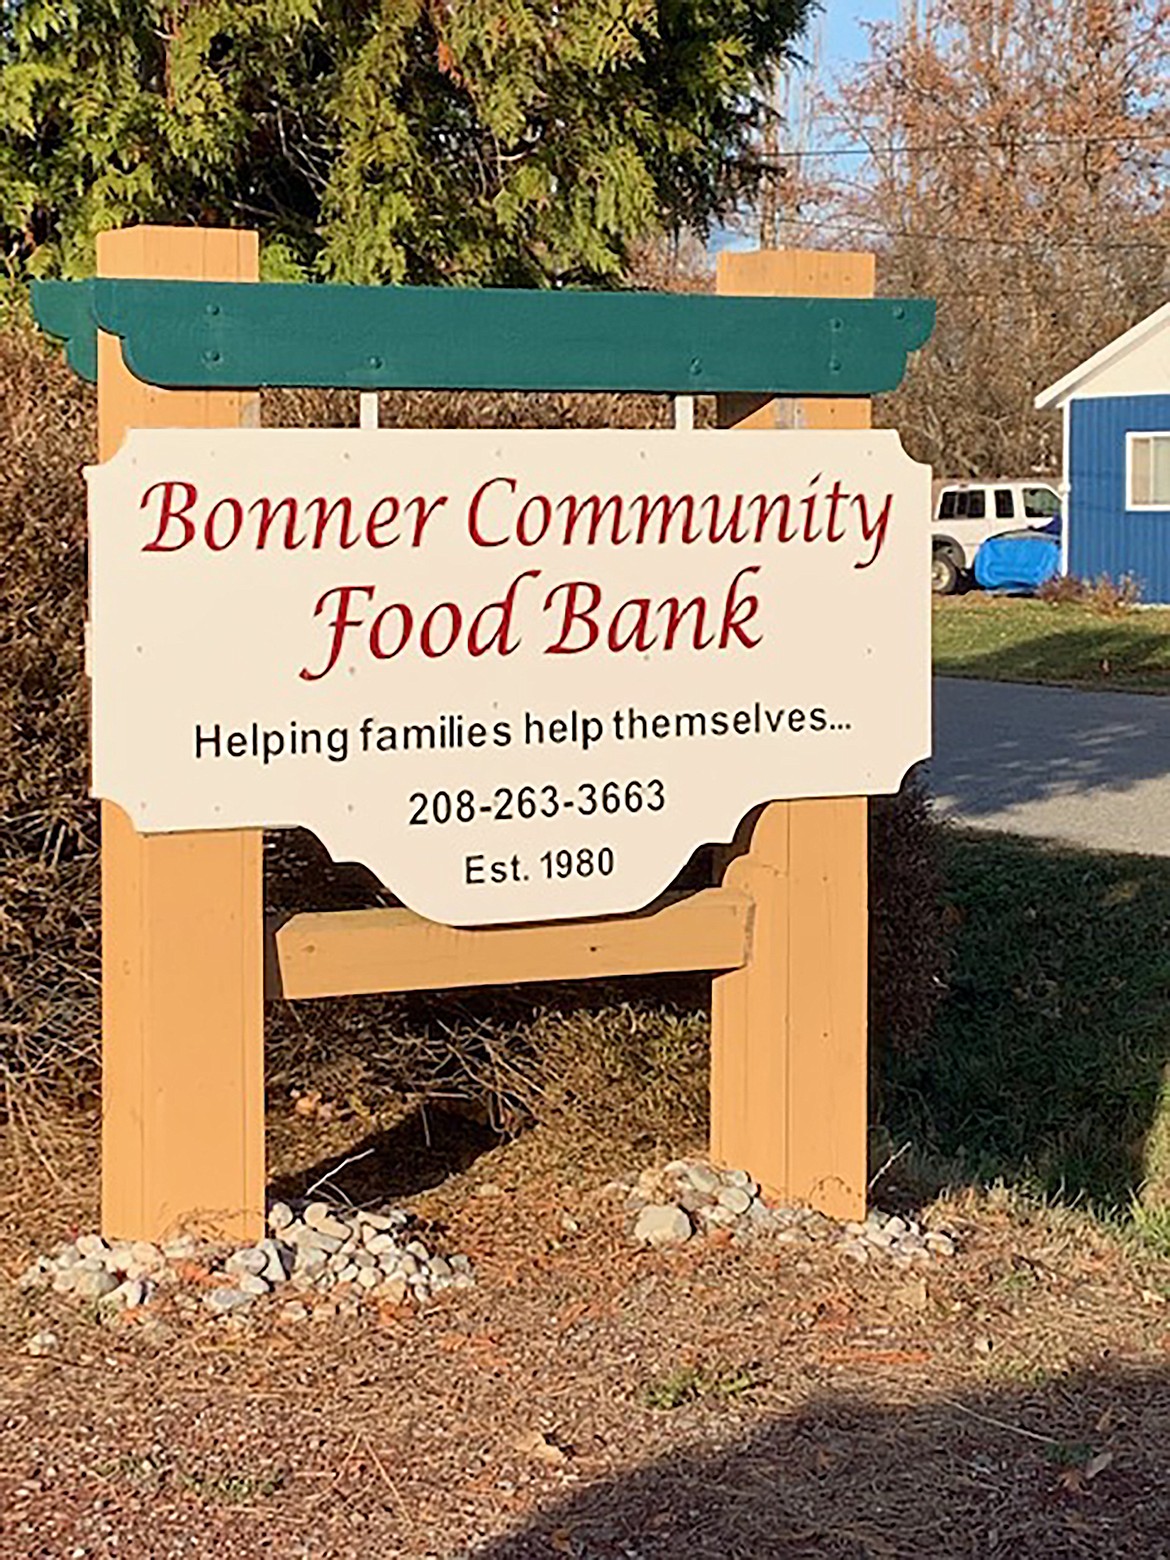 In any given year, the Bonner Community Food Bank distributes half a million pounds of food to the community. In this year of COVID-19, the nonprofit is on track to more than double that amount.